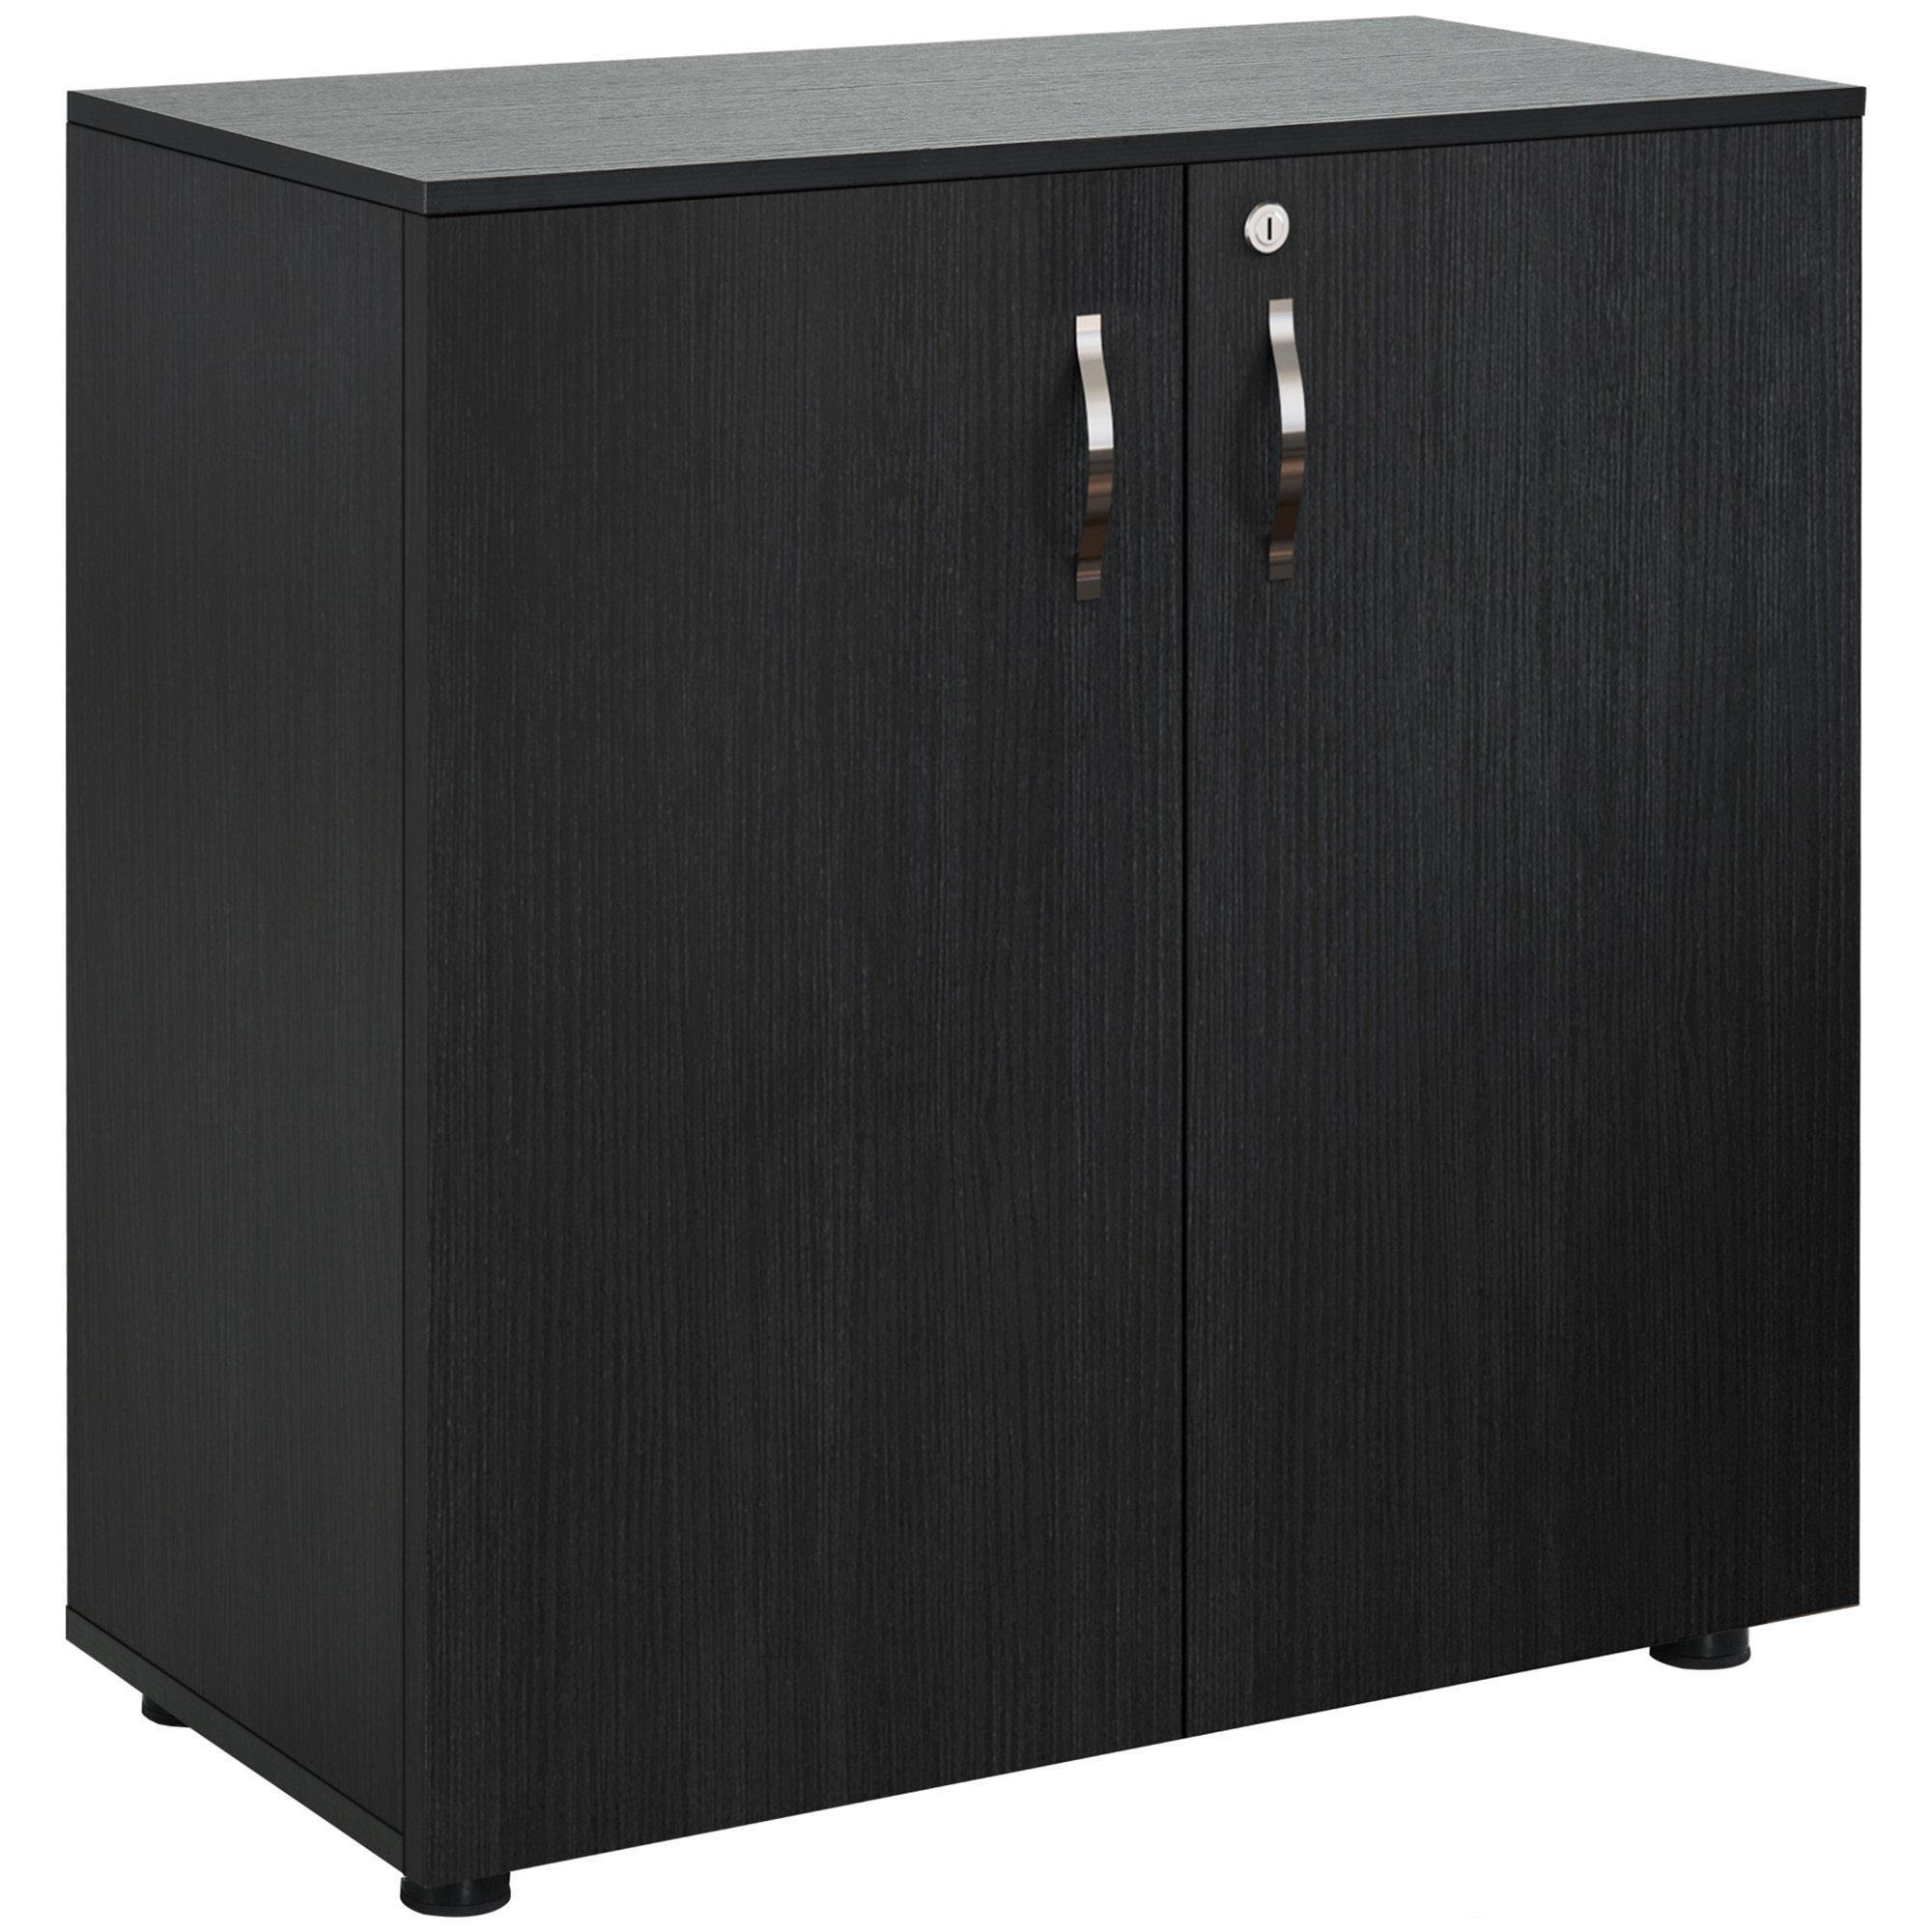 2-Tier Locking Office Storage Cabinet File Organisation with Handles - image 1